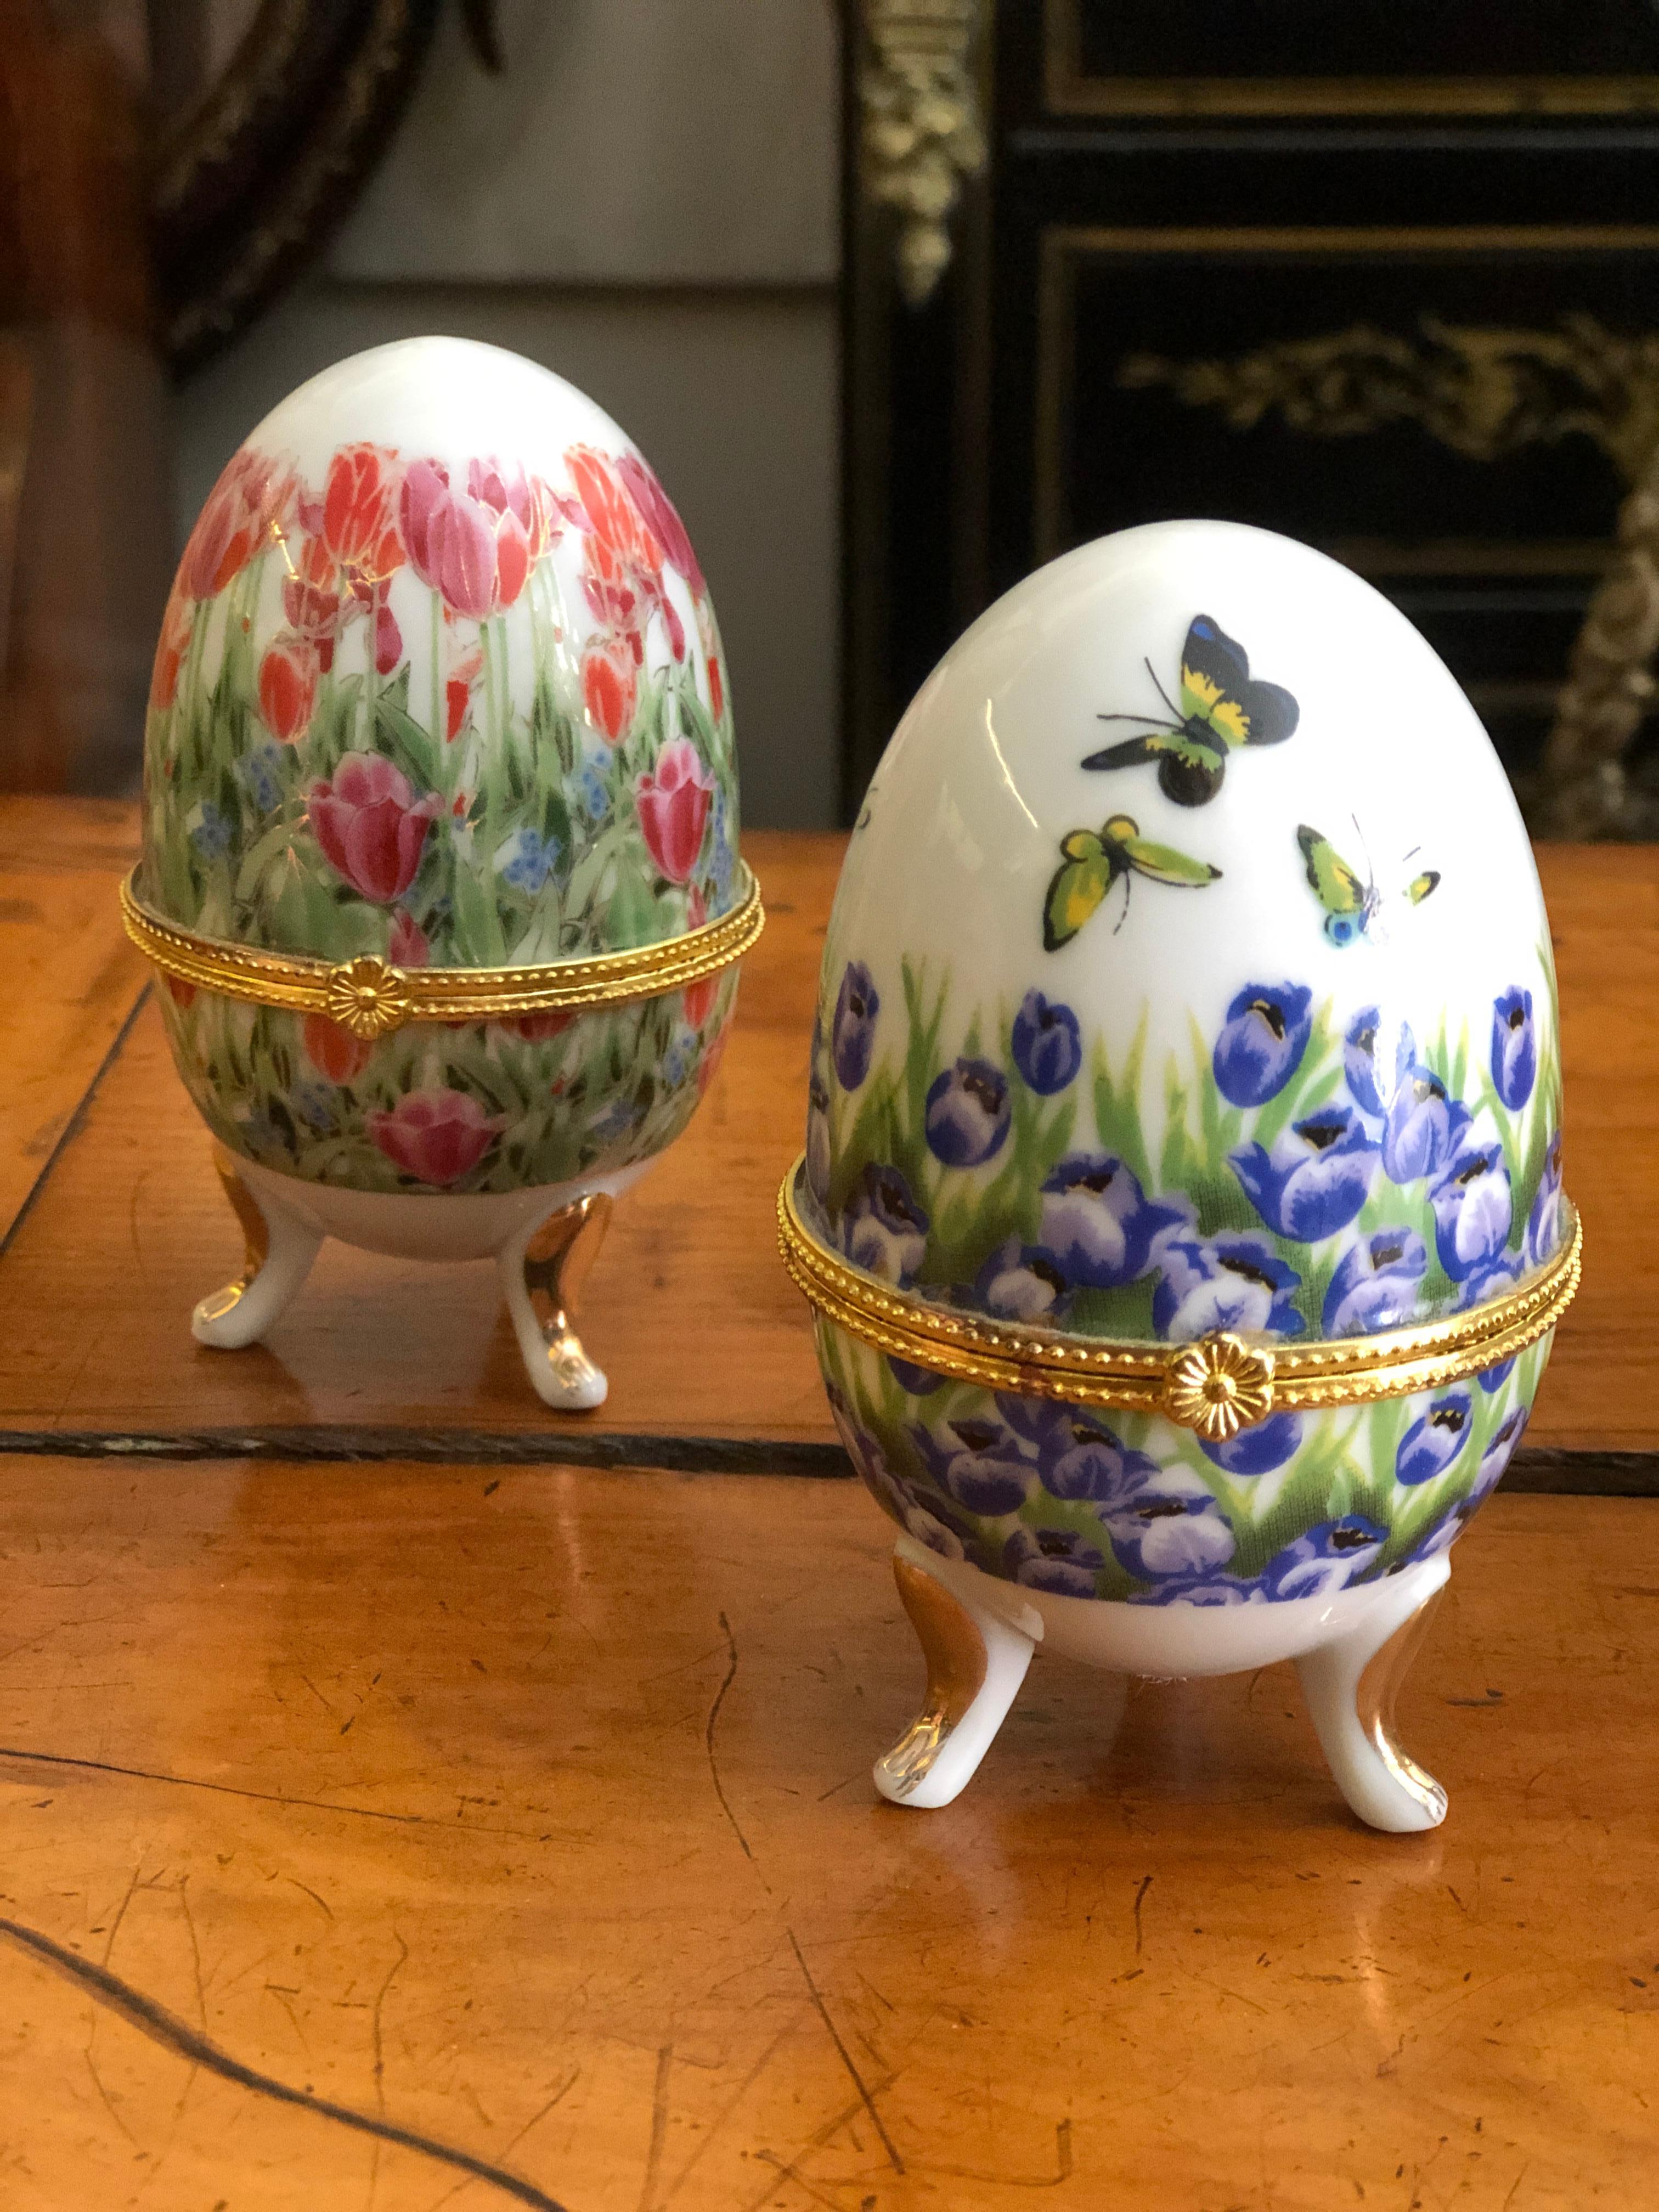 Pair of small painted ceramic egg boxes raised on tripod legs.
France, circa 2000.